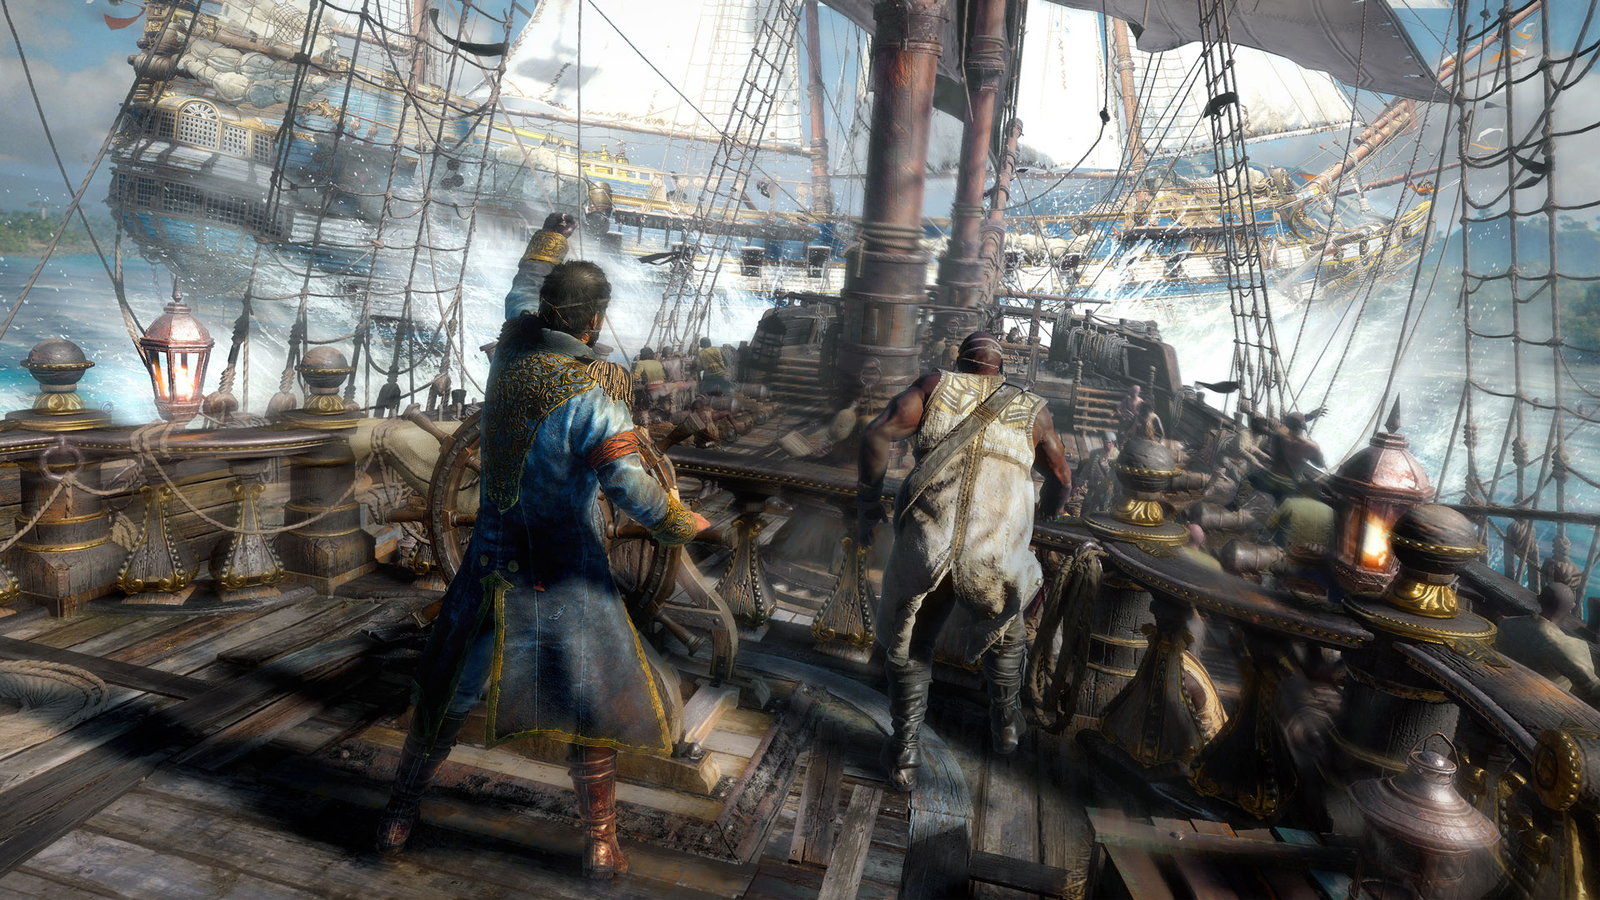 Skull & Bones Hunting Grounds detailed; beta allows early access